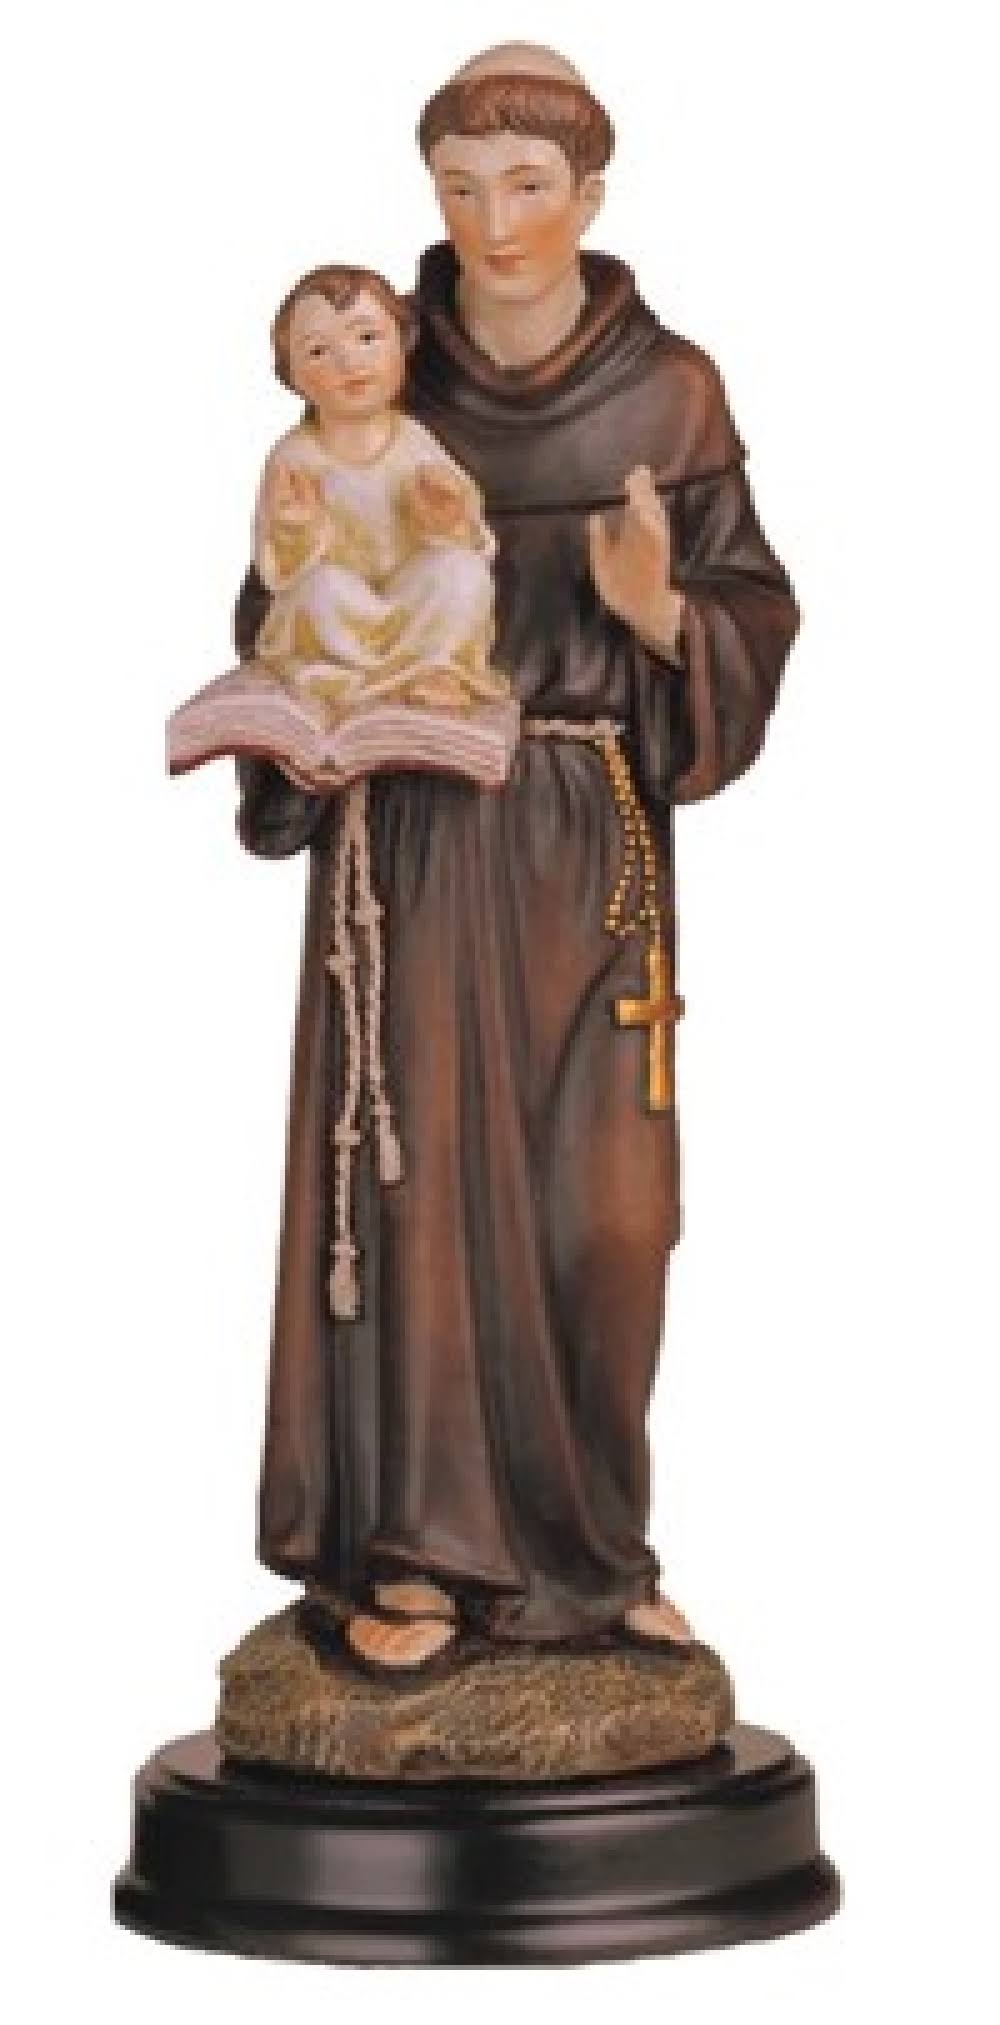 StealStreet SS-G-205.09 5-Inch Saint Anthony Holy Figurine Religious Decoration Statue Decor